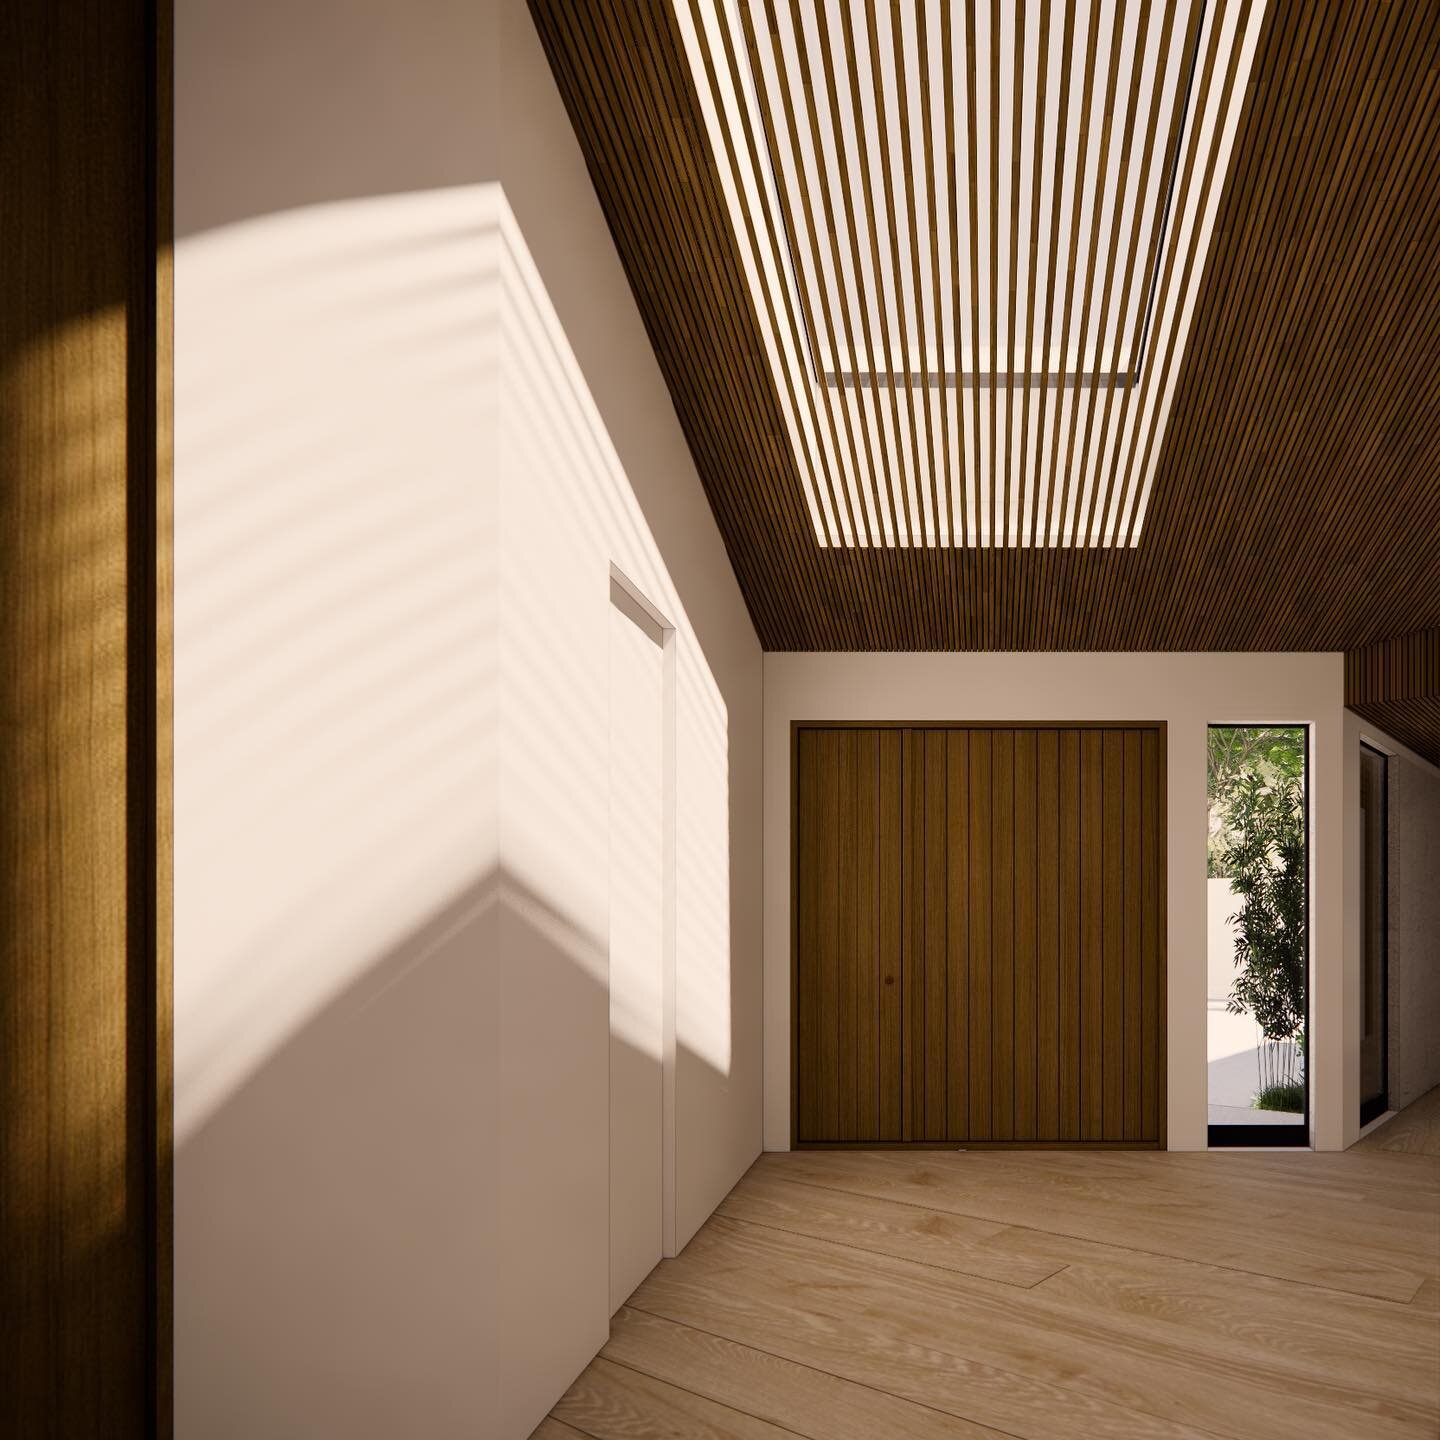 The front door in our upcoming Malibu project takes on the characteristics of flow and connection.

#sophiegoineaudesigns #architecturaldesign #interiordesigner #interiorarchitect #interiordesign #luxuryinteriors #interiors #residentialdesign #contem